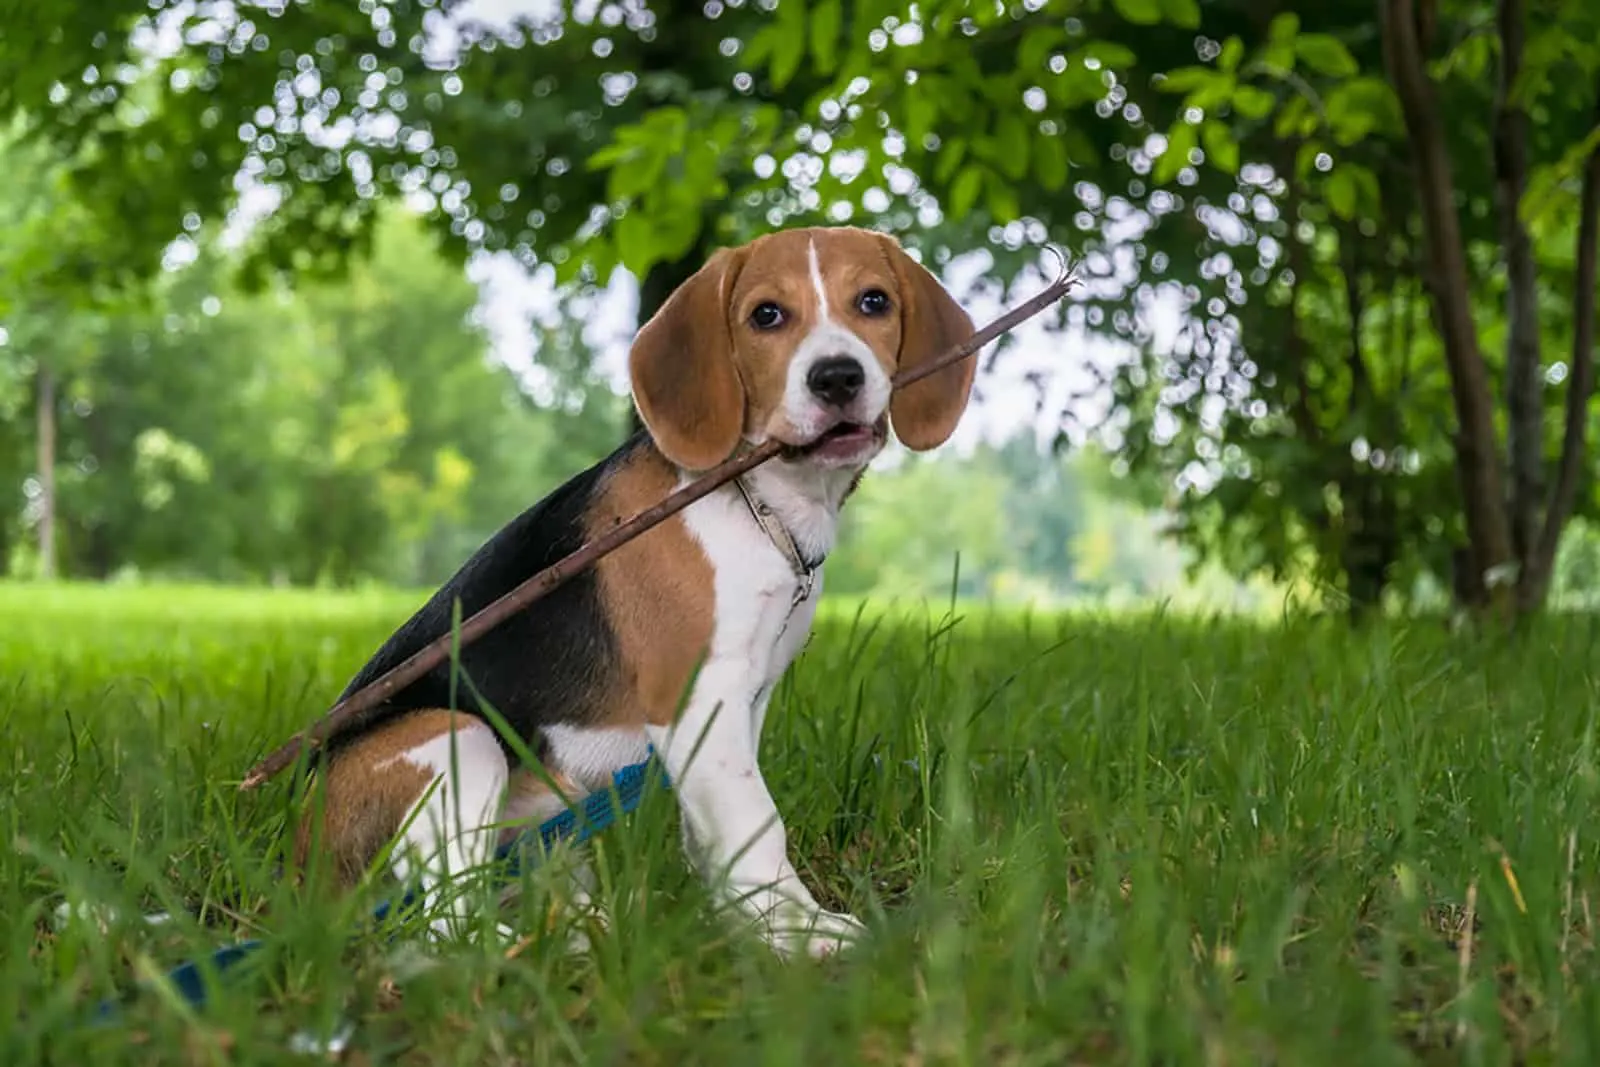 beagle dog holding stick in mouth